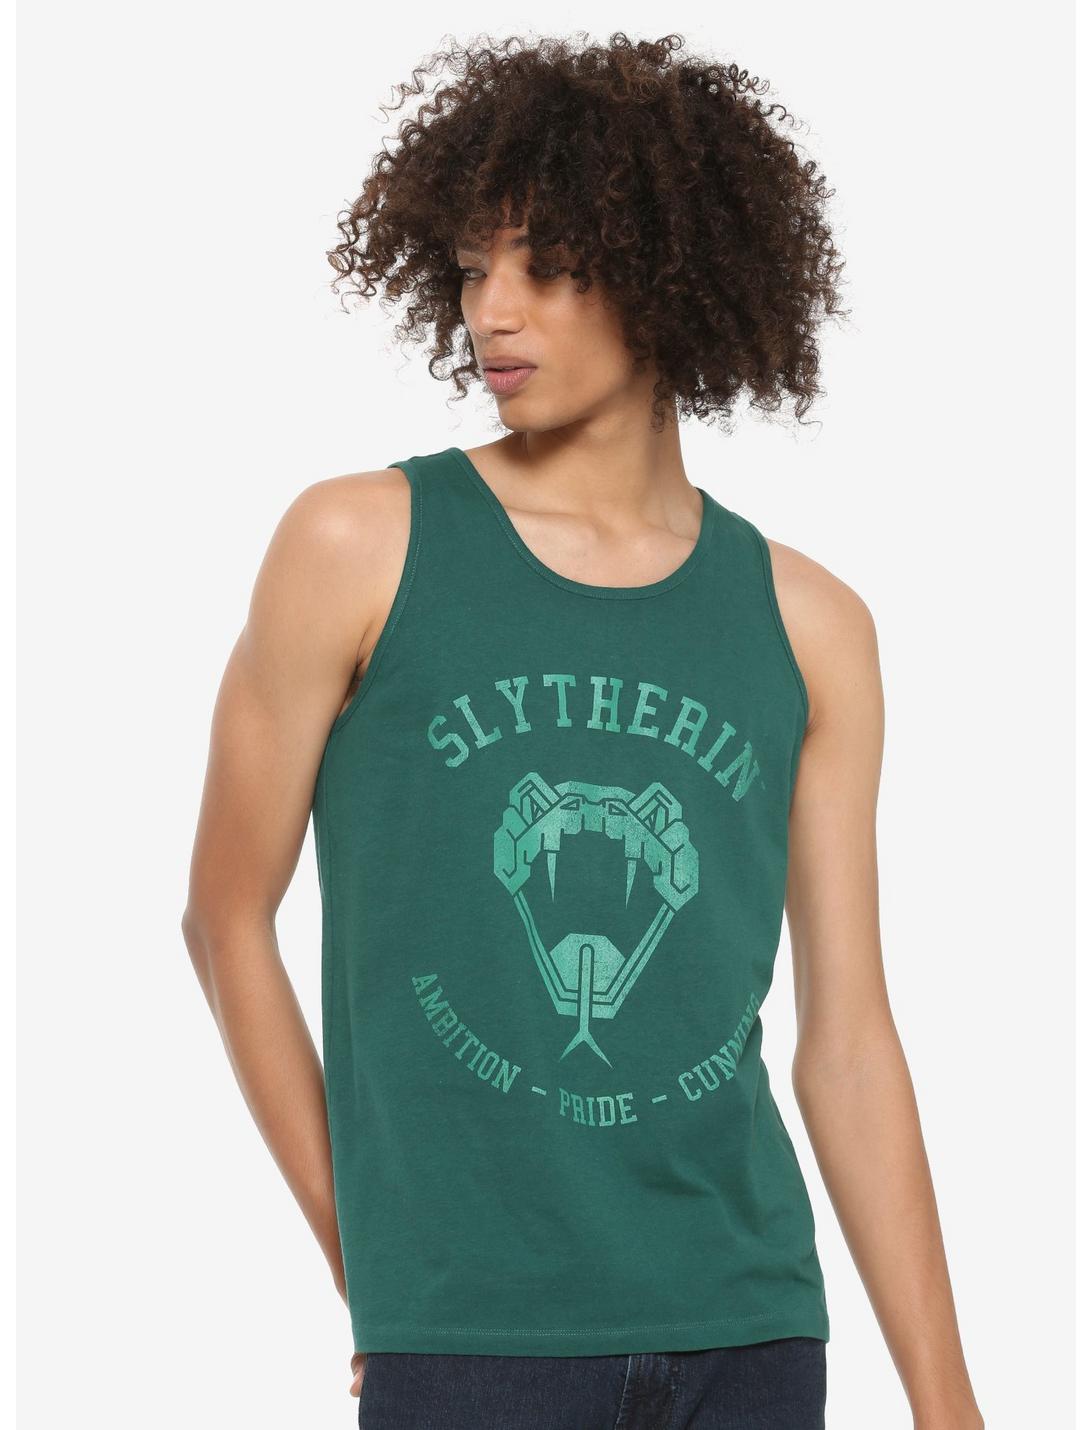 Harry Potter Slytherin Tank Top - BoxLunch Exclusive, GREEN, hi-res